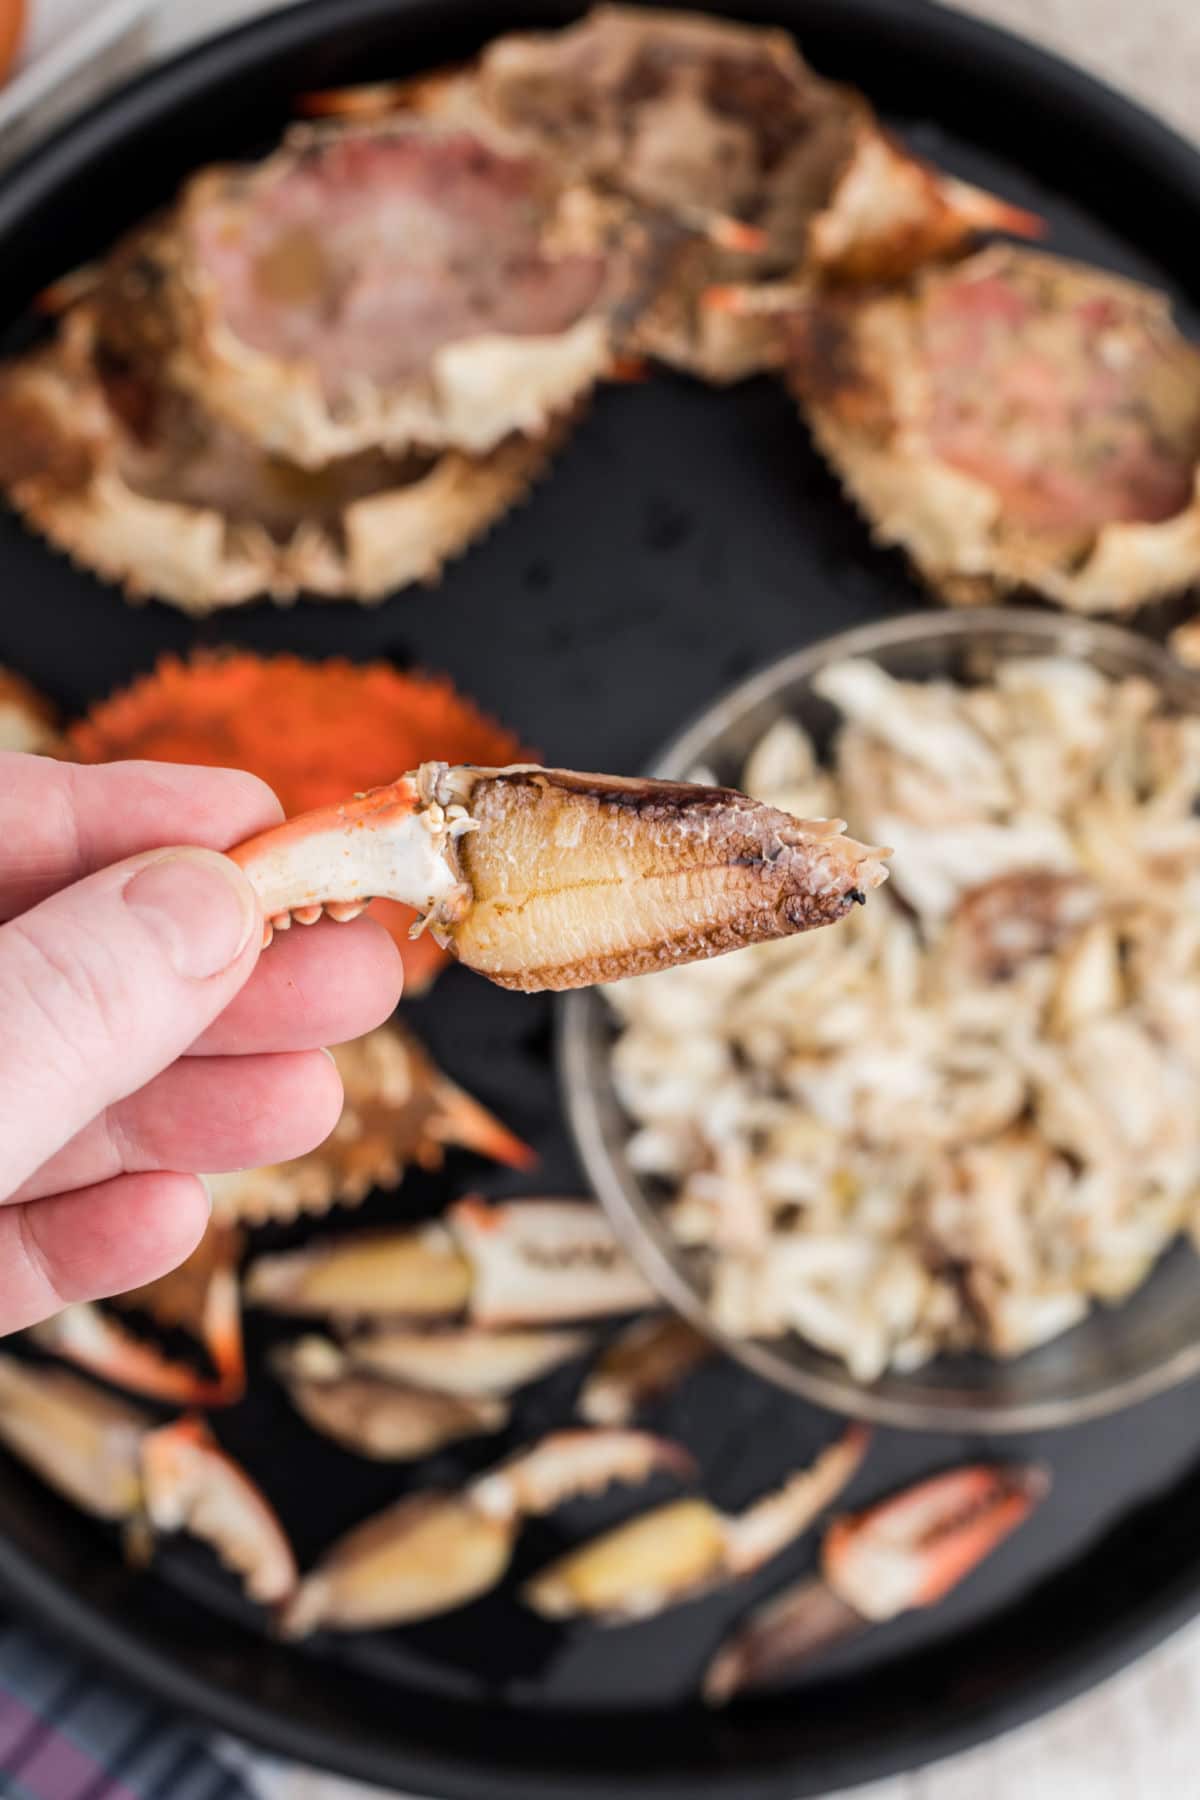 hand holding up a peeled crab claw full of meat - stuffed crab recipe